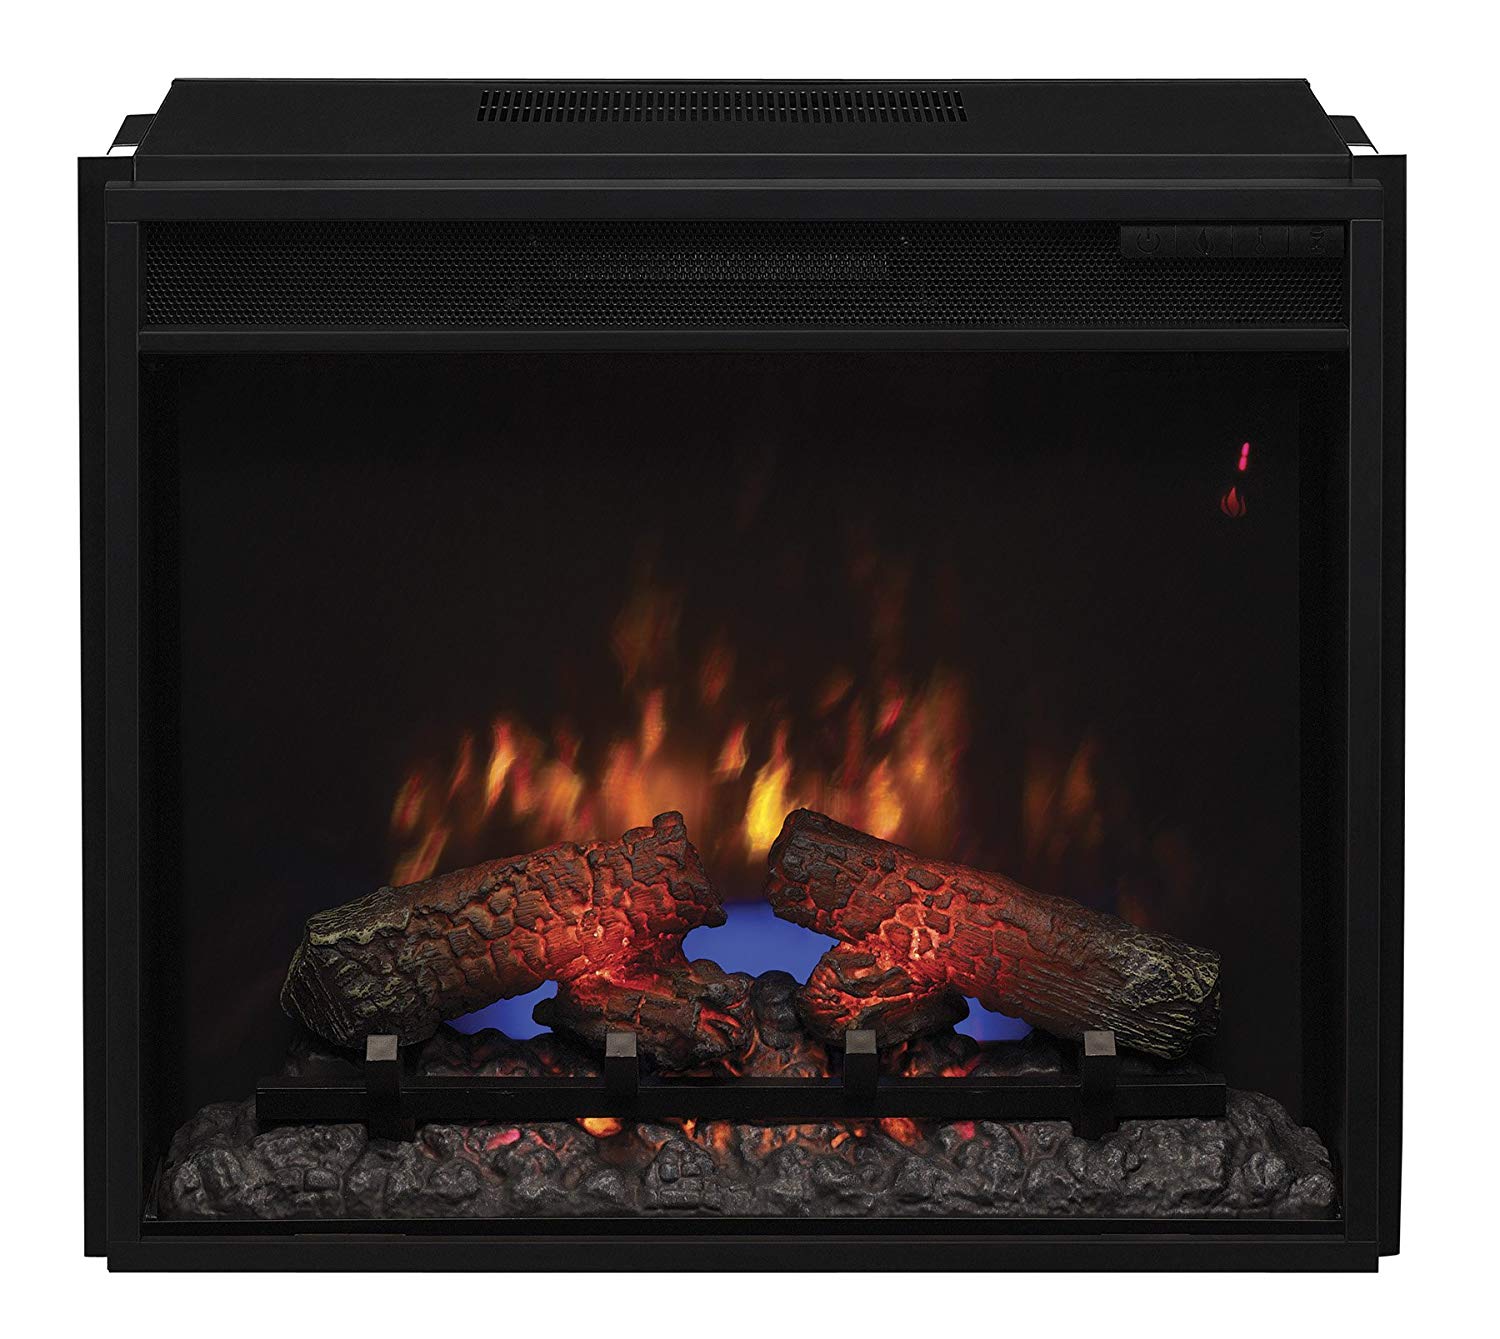 Stand Alone Propane Fireplace Lovely Classicflame 23ef031grp 23" Electric Fireplace Insert with Safer Plug